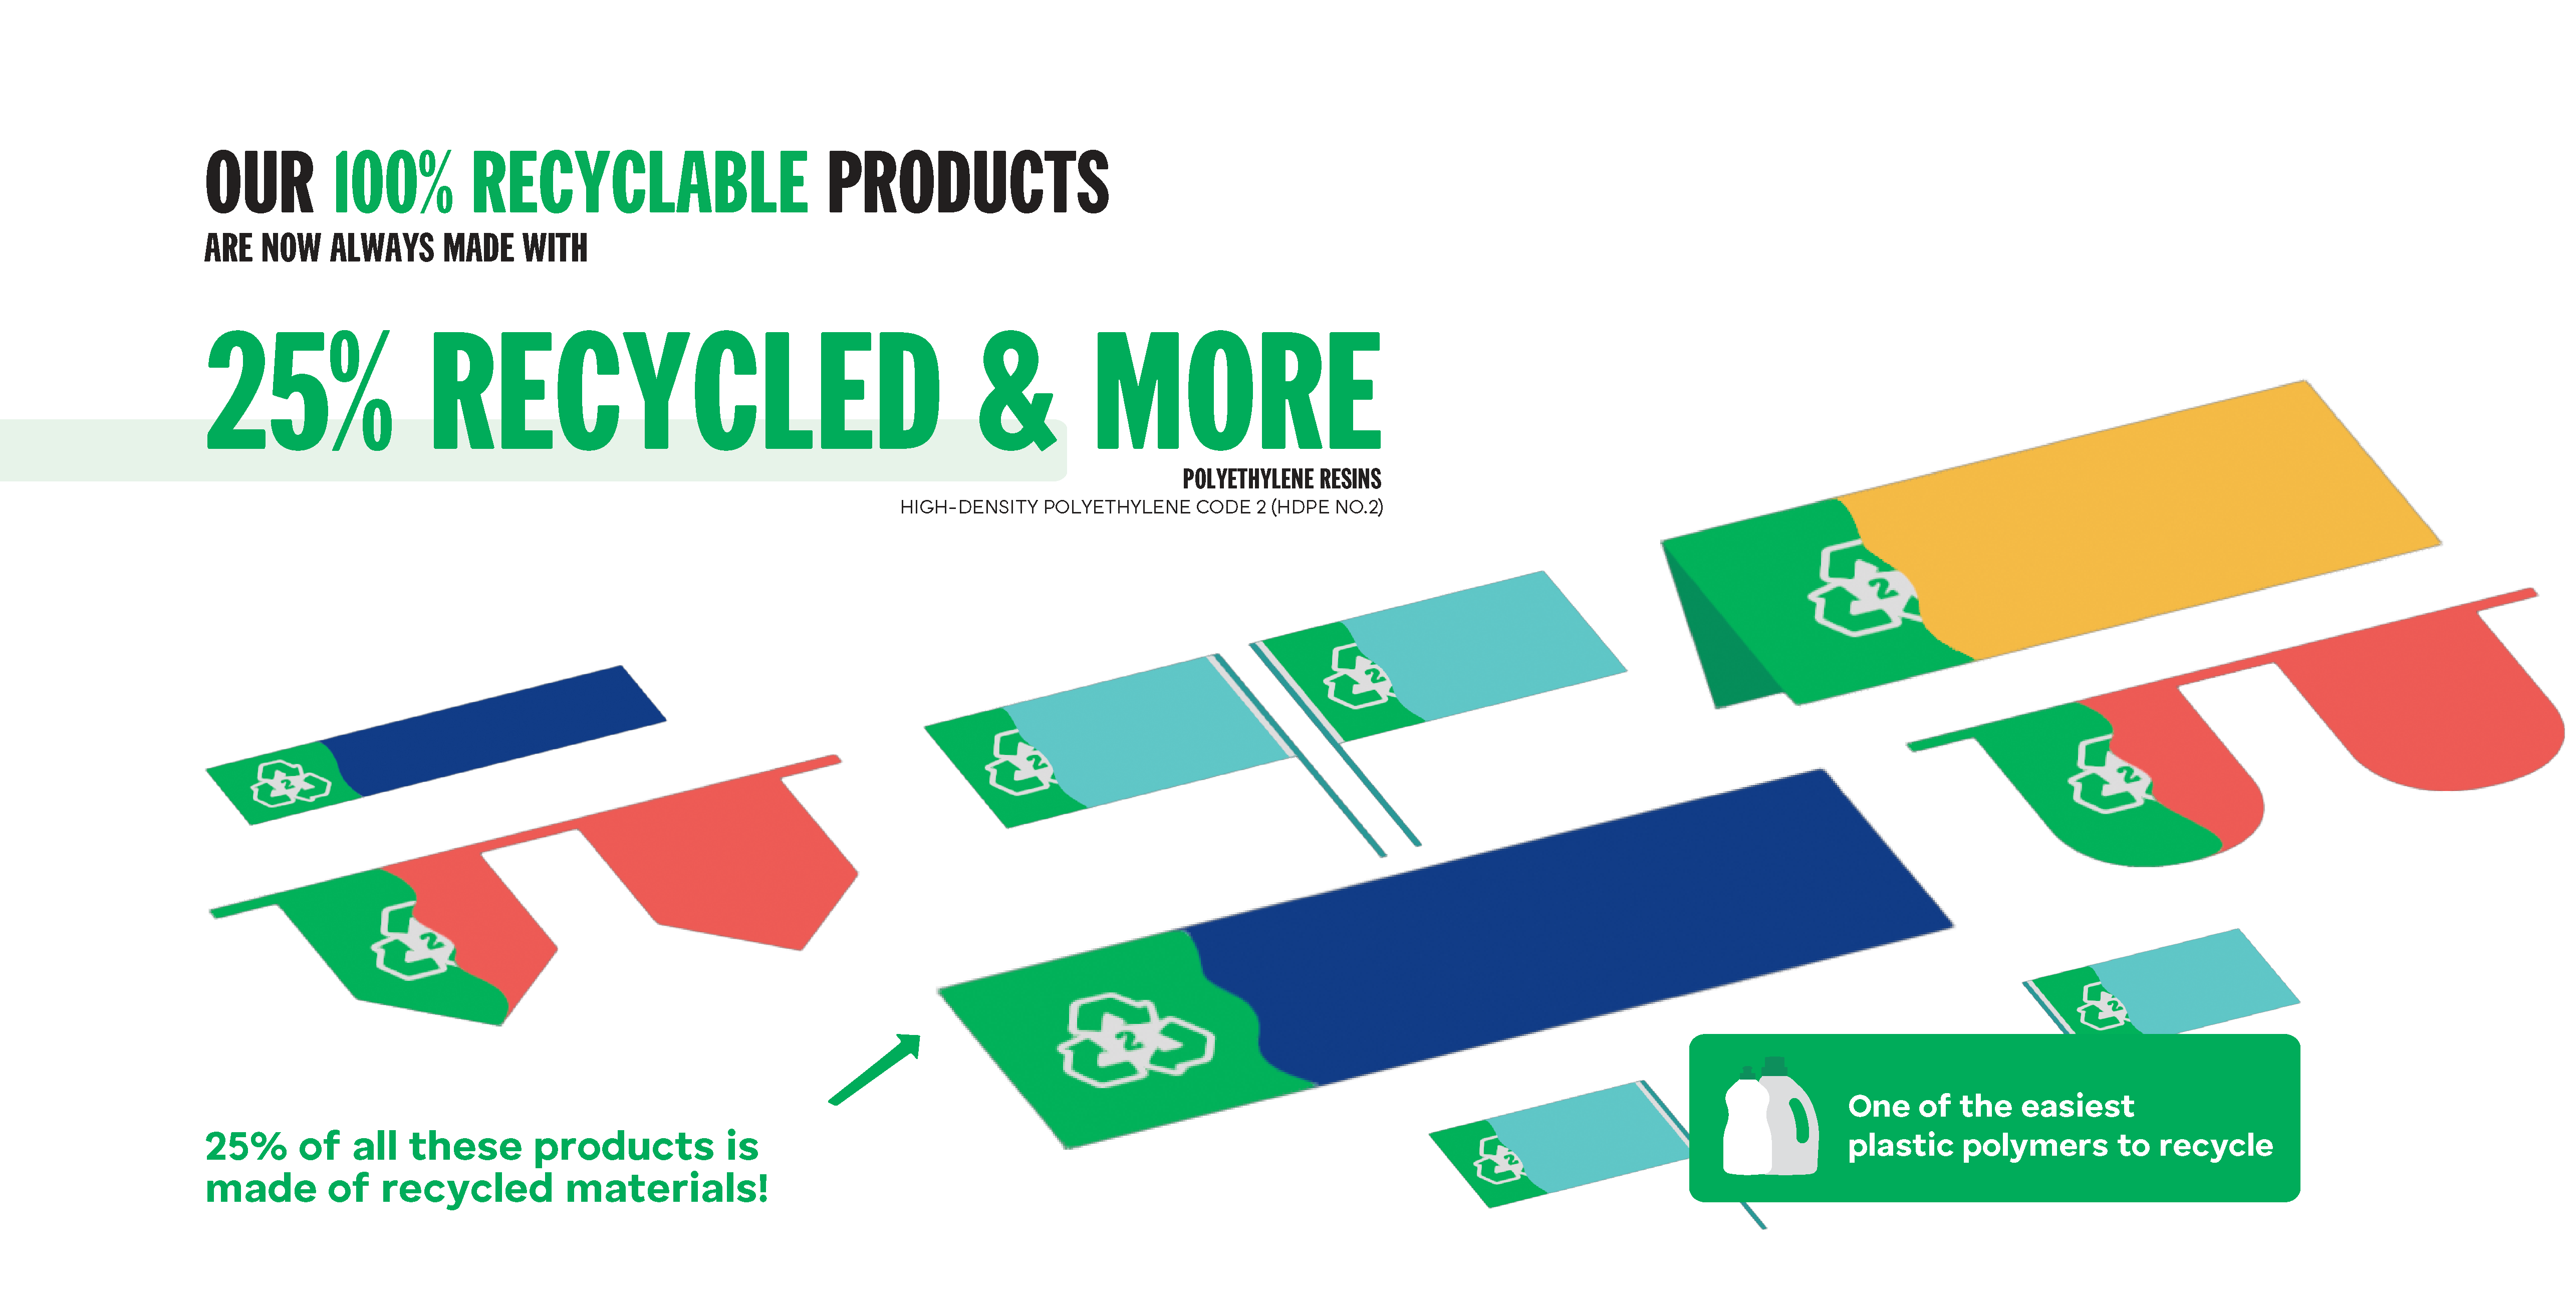 All of our products contain a minimum of 25% recycled material.